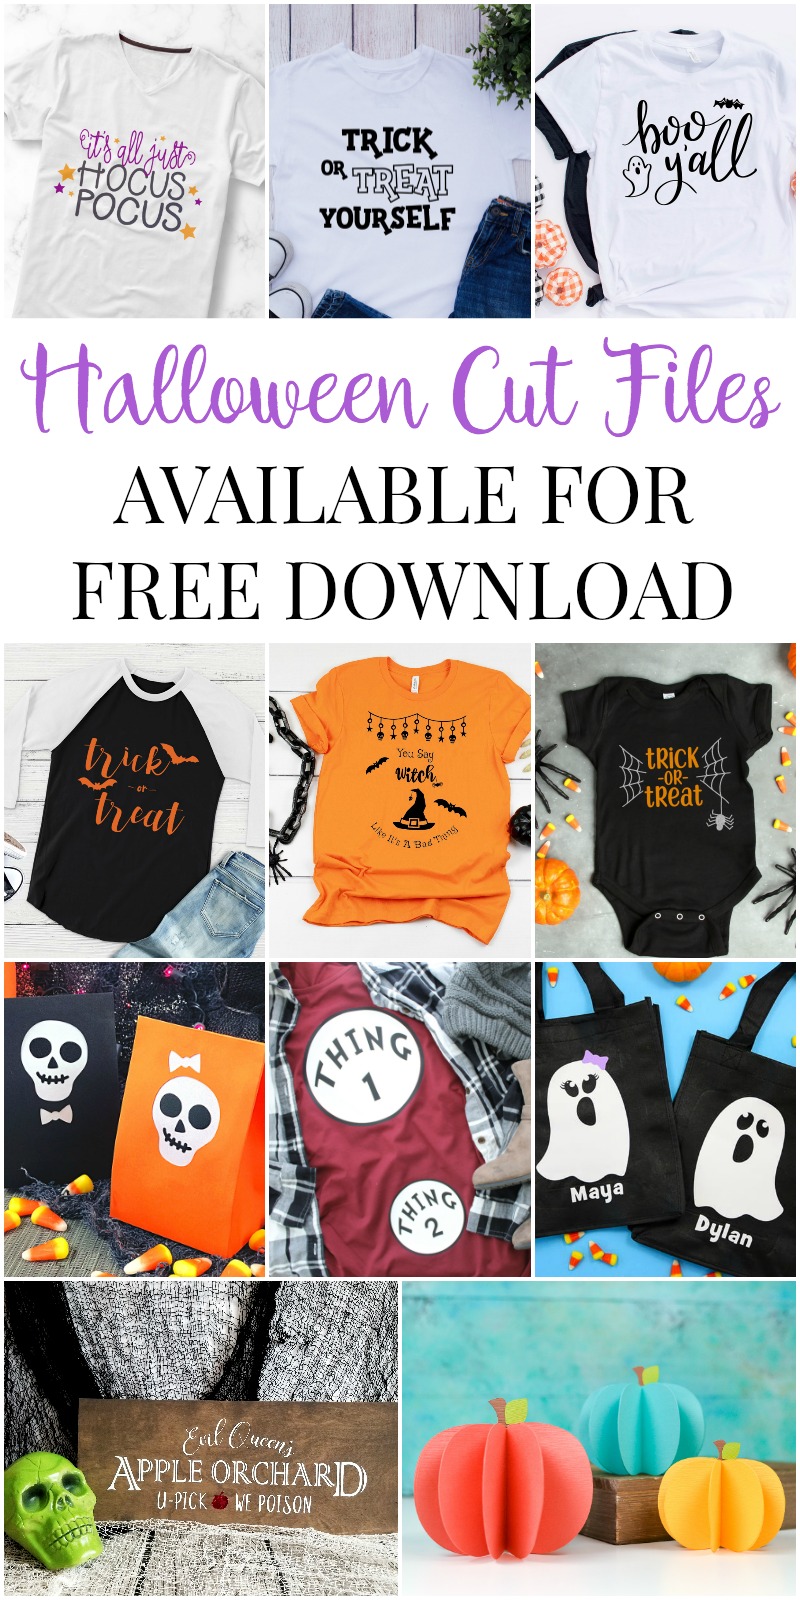 11 Free Halloween Themed SVG Files that you can use for crafting with your Cricut or Silhouette.